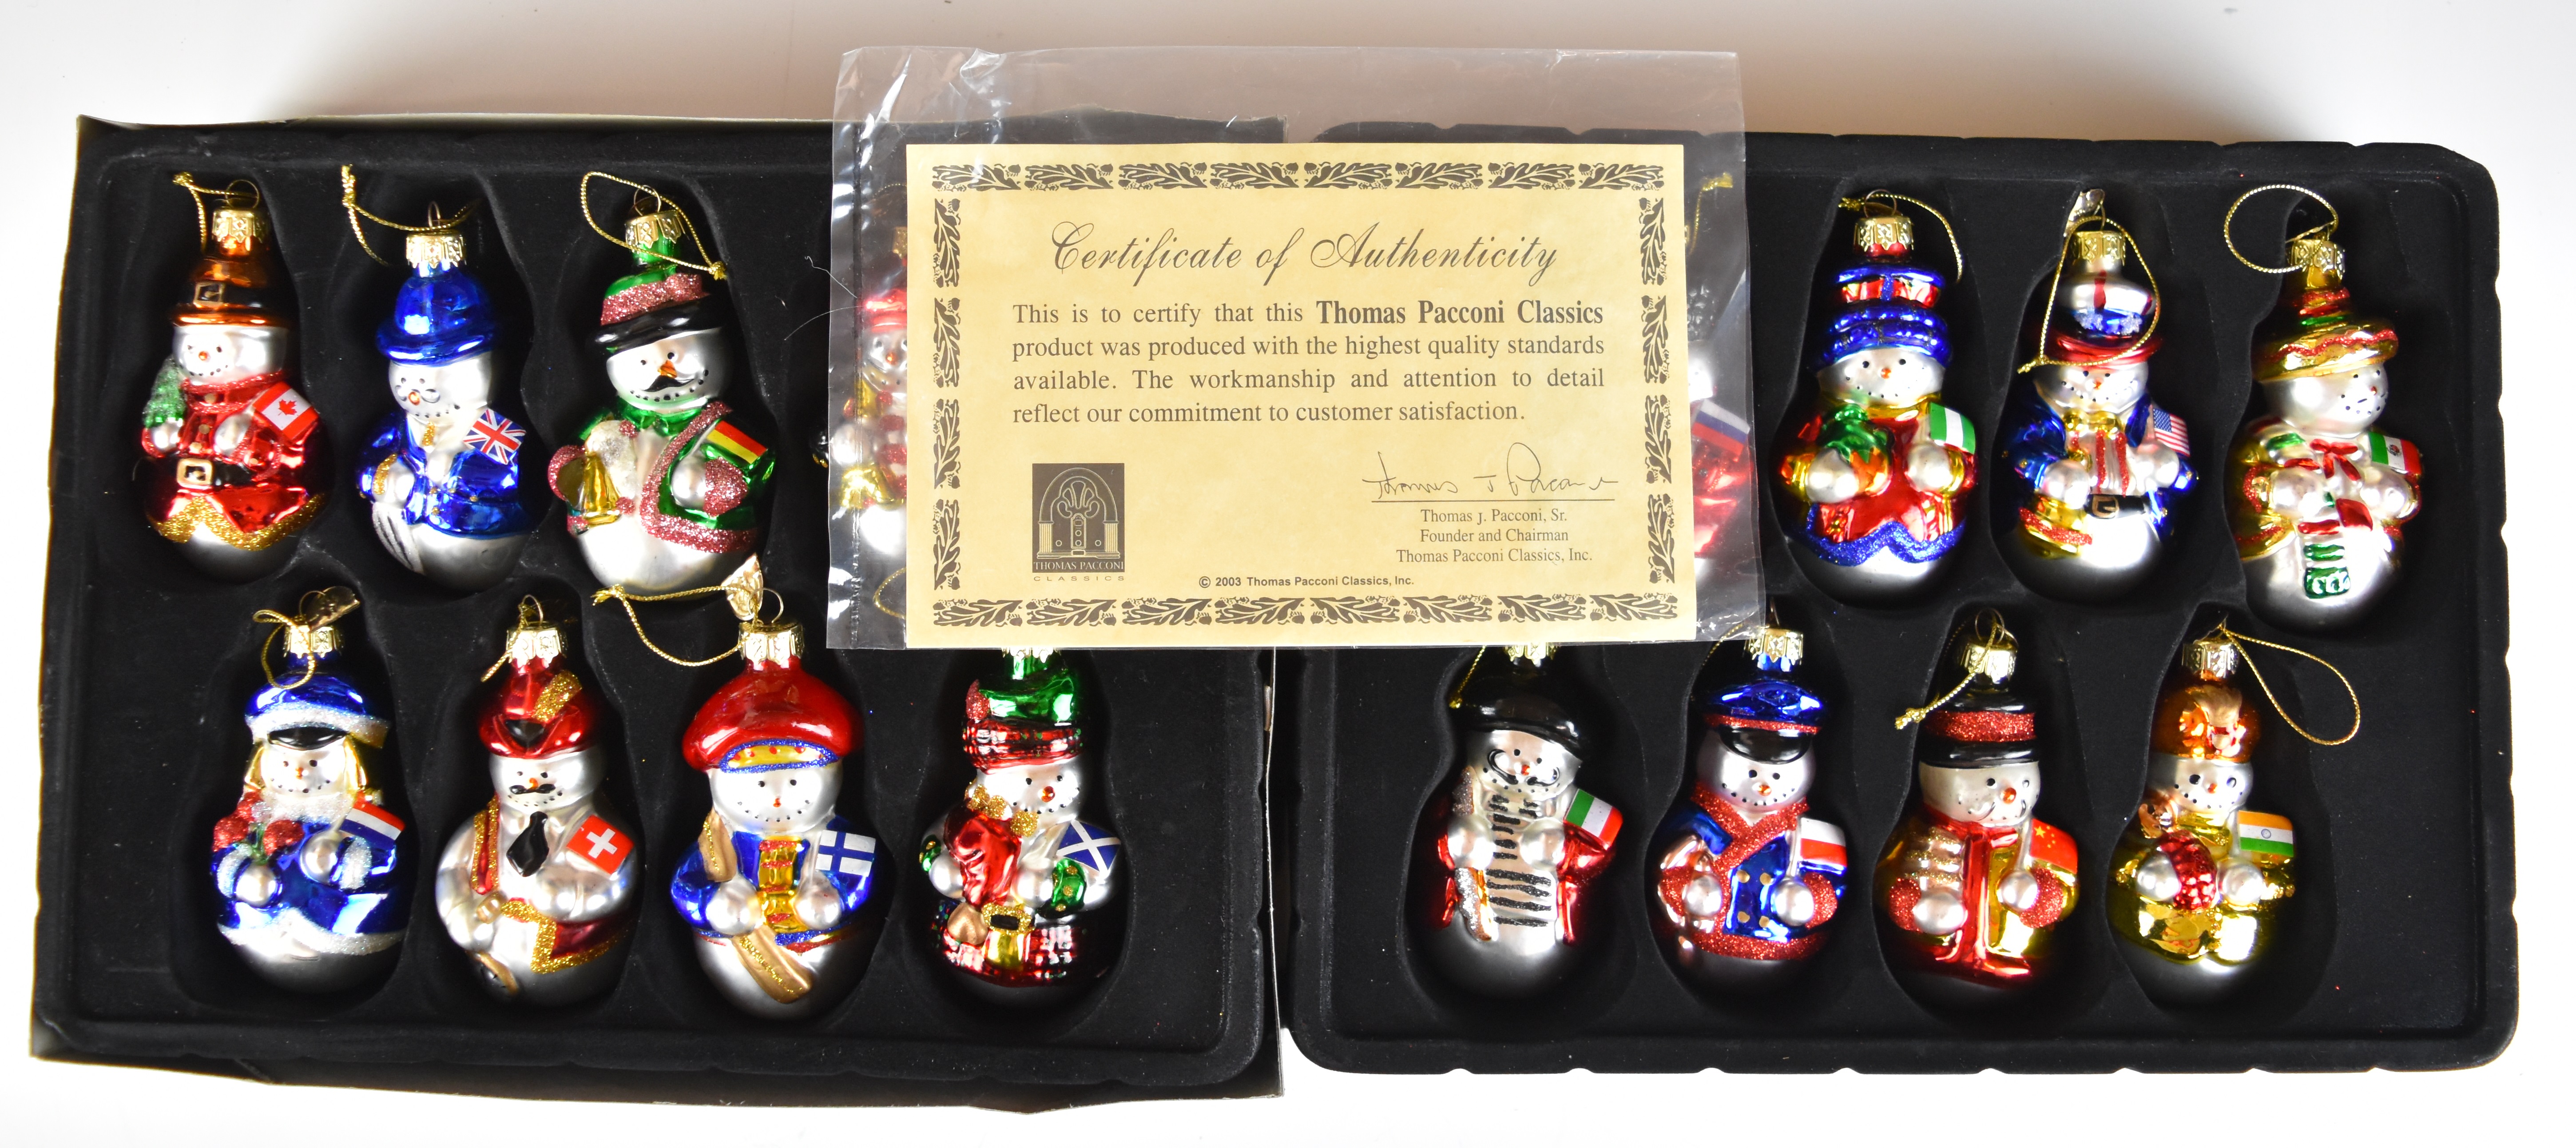 Thomas Pacconi Classics set of 18 glass Snowman Christmas tree baubles, in original wooden case with